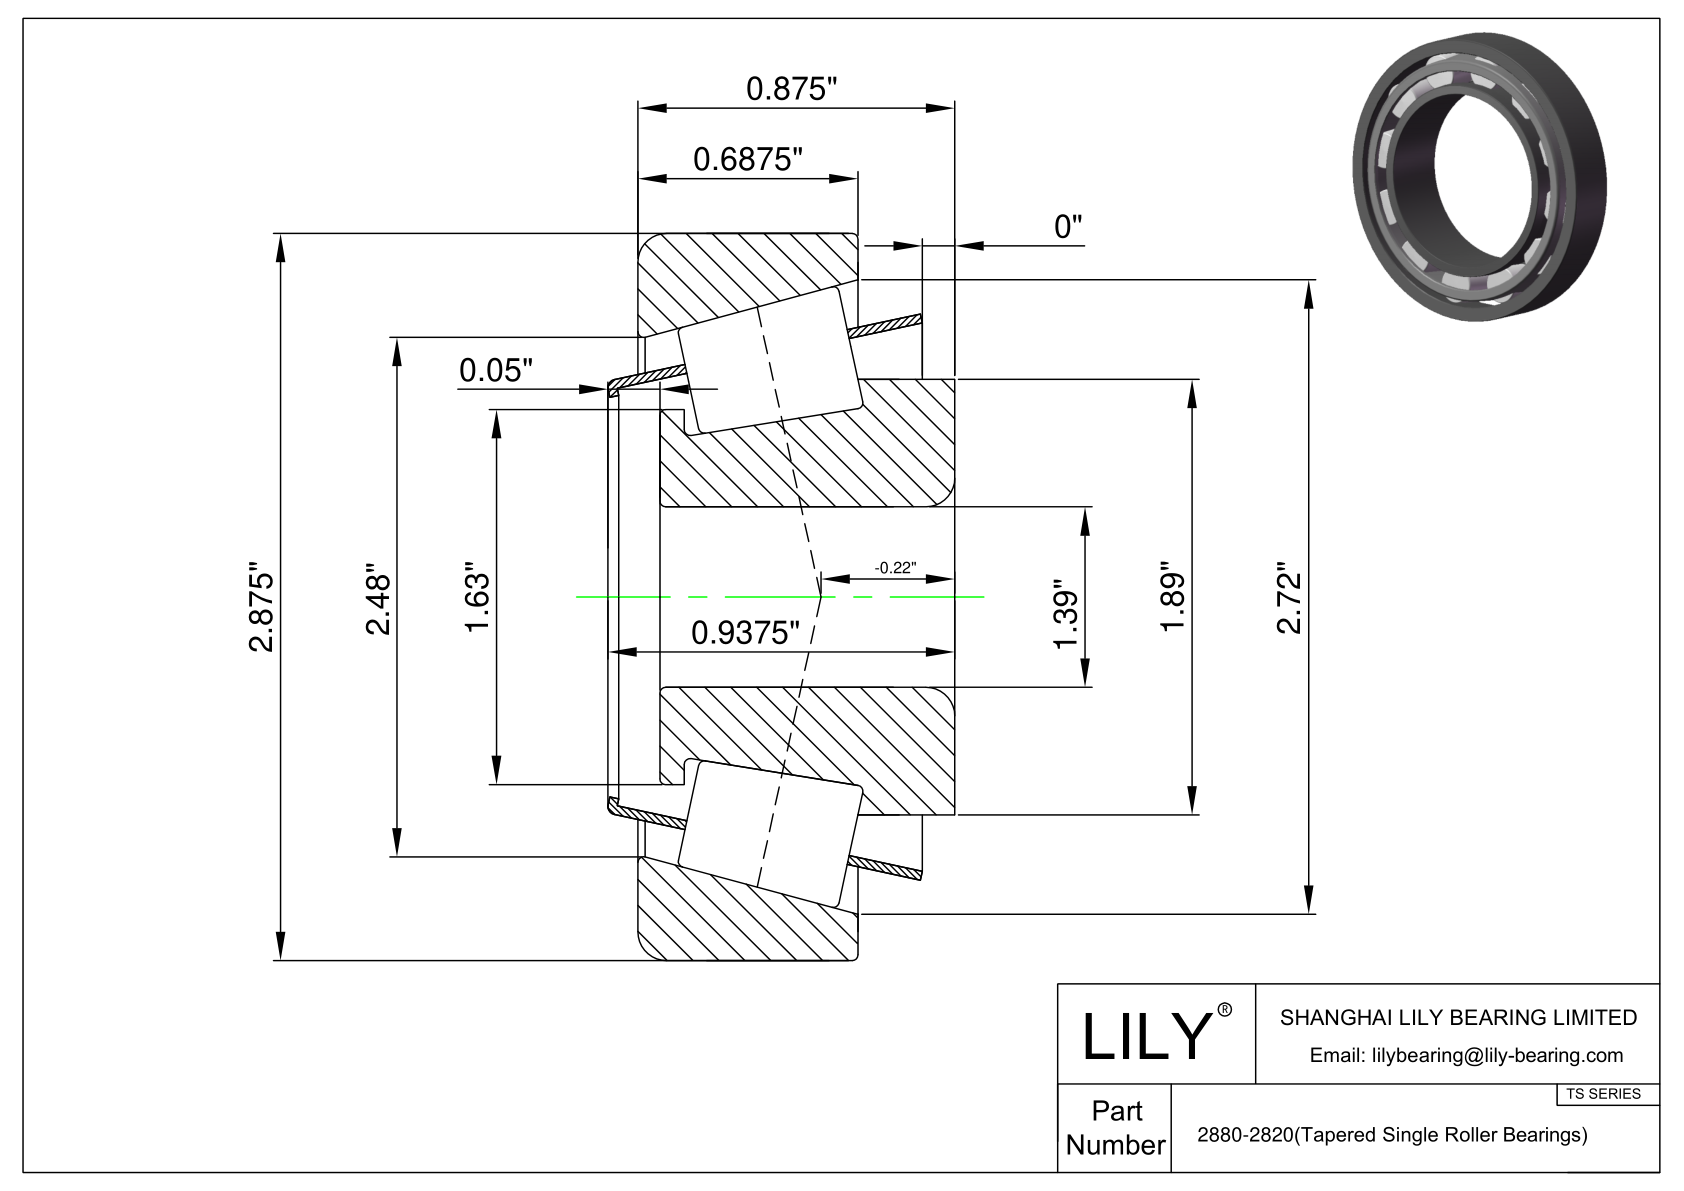 2880-2820 TS (Tapered Single Roller Bearings) (Imperial) cad drawing